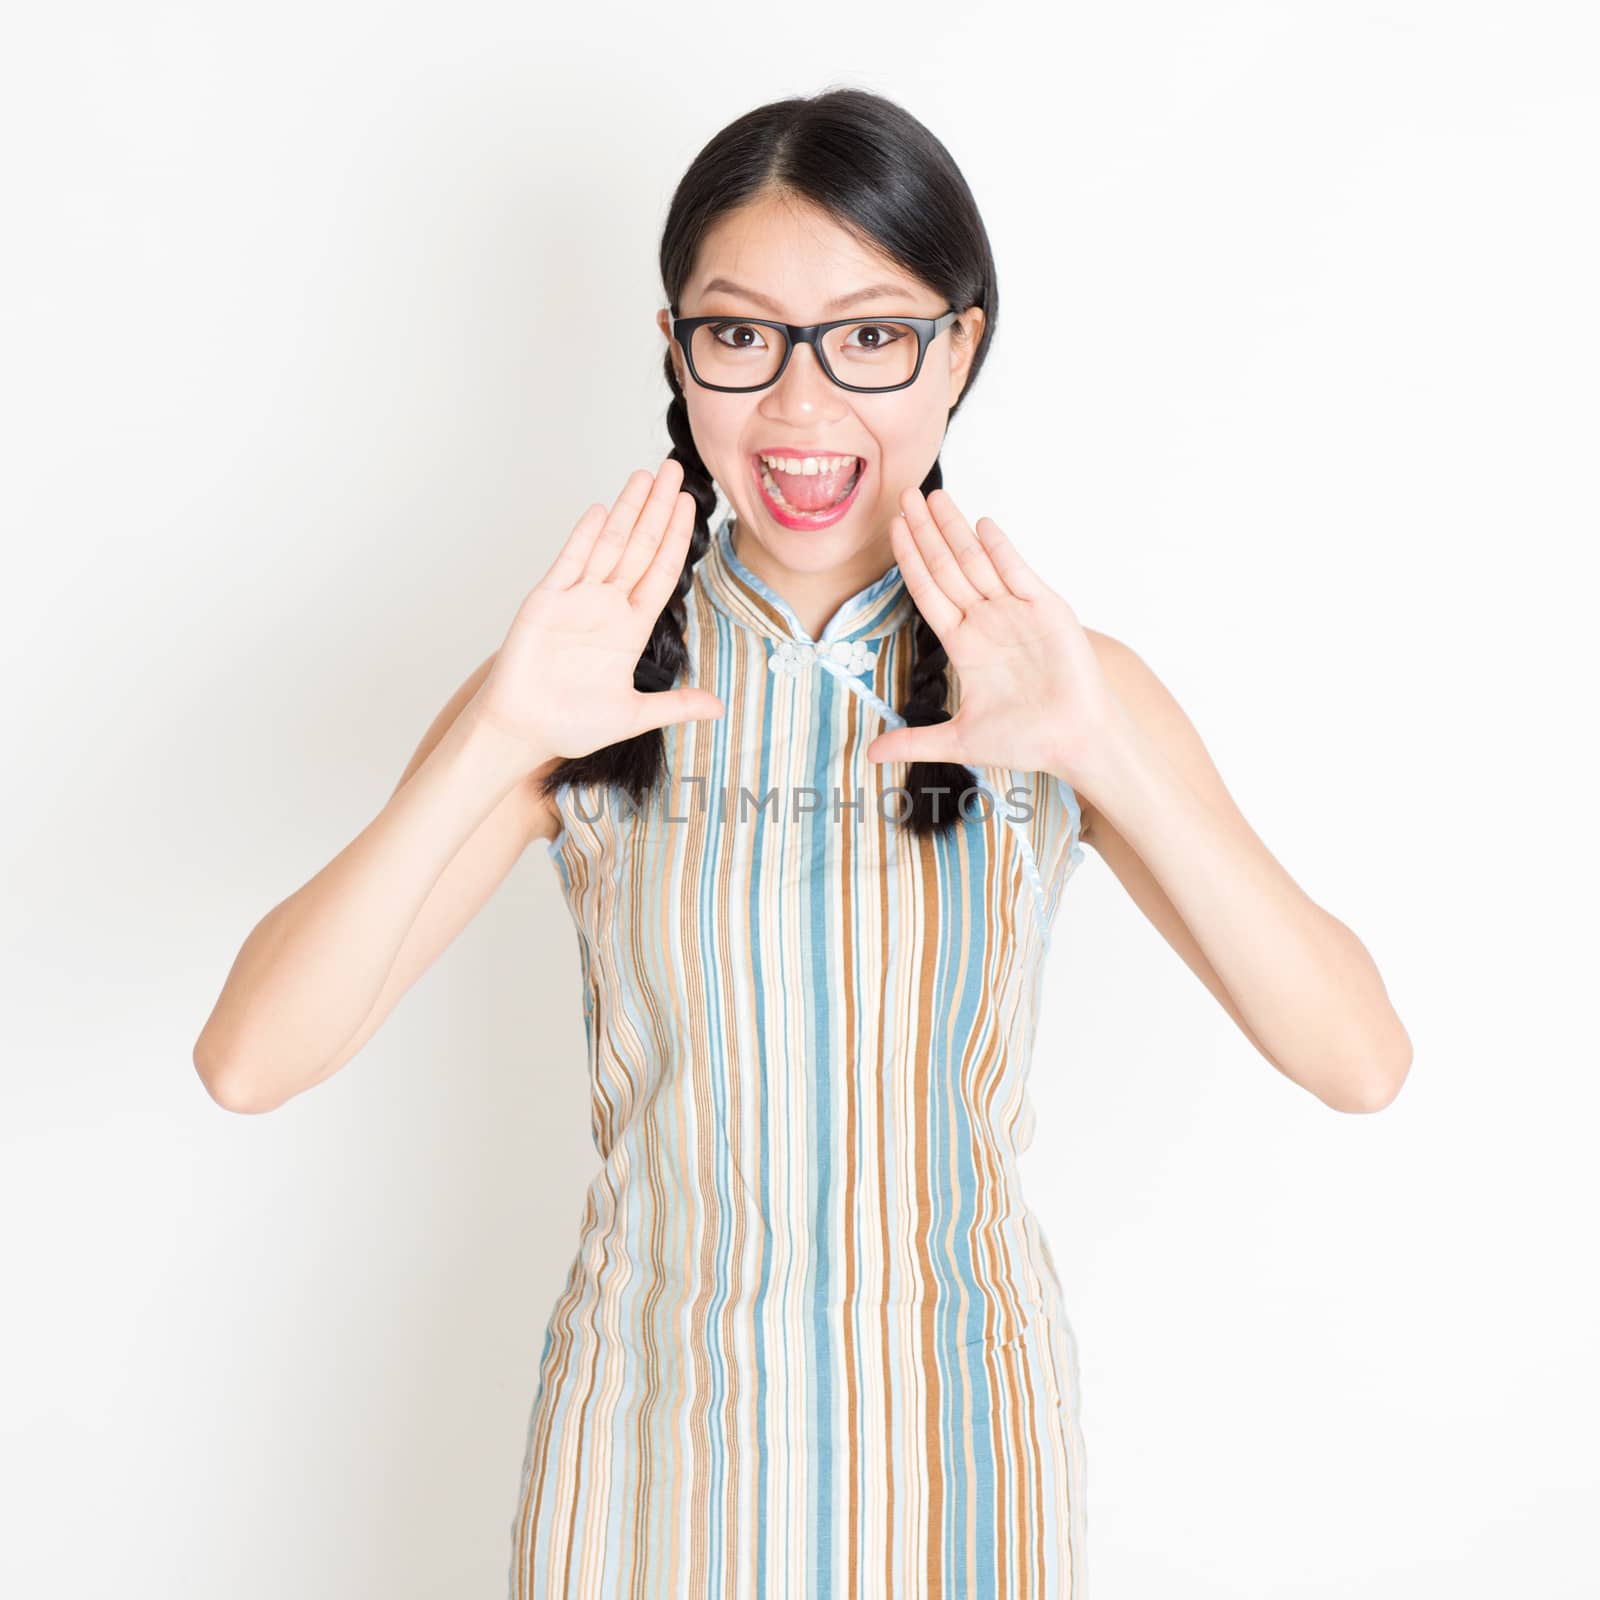 Portrait of young Asian girl in traditional qipao dress shouting, mouth opened wide, celebrating Chinese Lunar New Year or spring festival, standing on plain background.